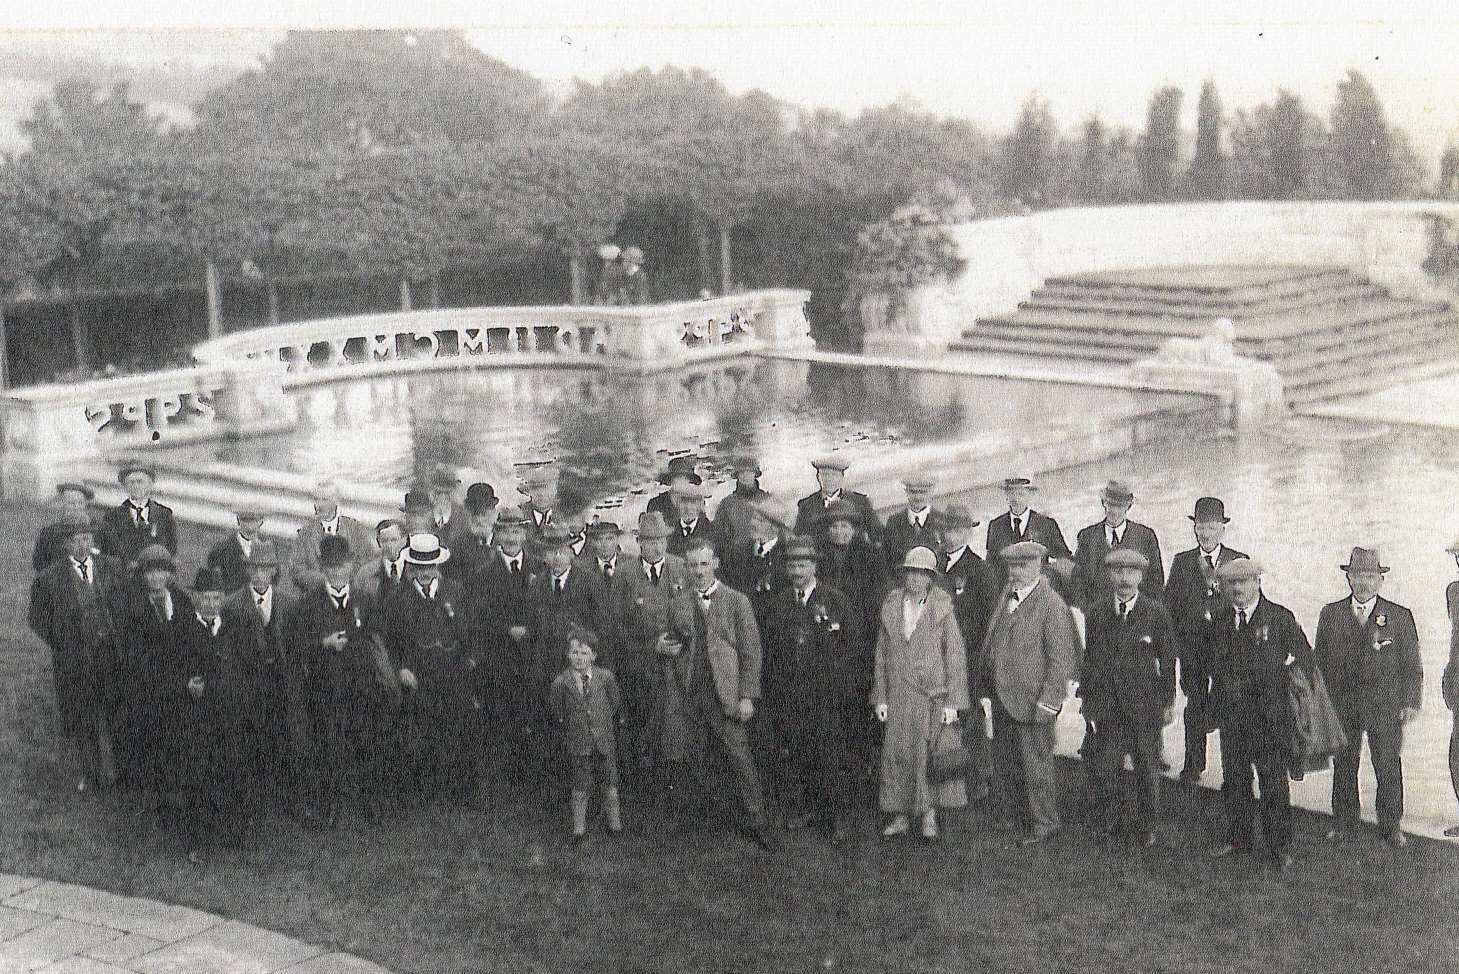 The mansion's opening day in 1913